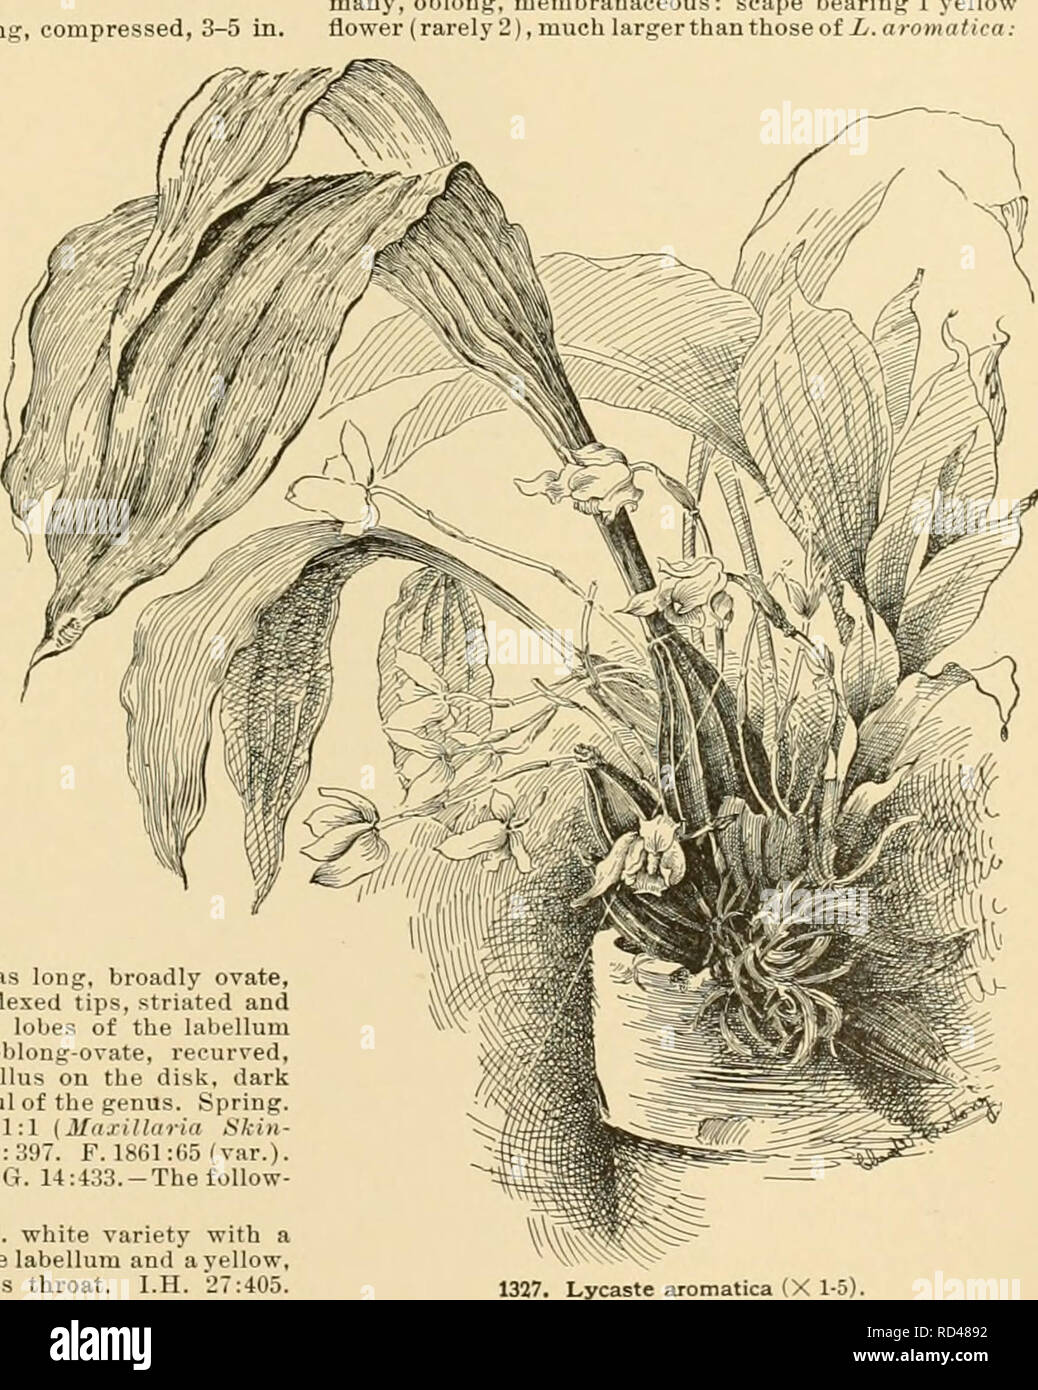 . Cyclopedia of American horticulture : comprising suggestions for cultivation of horticultural plants, descriptions of the species of fruits, vegetables, flowers, and ornamental plants sold in the United States and Canada, together with geographical and biographical sketches. Gardening; Horticulture; Horticulture; Horticulture. been LYCASTE crenulate; callus tongue-shaped, concave. Often the parts of the flower are more or less spotted and hairy in places. July, Aug. Colombia. Gt. 1321. 5. Idnipes, Lindl. Pseudobulbs large: Ivs. lanceo- late, 12-18 in. long: fls. solitary, as many as 15 on a  Stock Photo